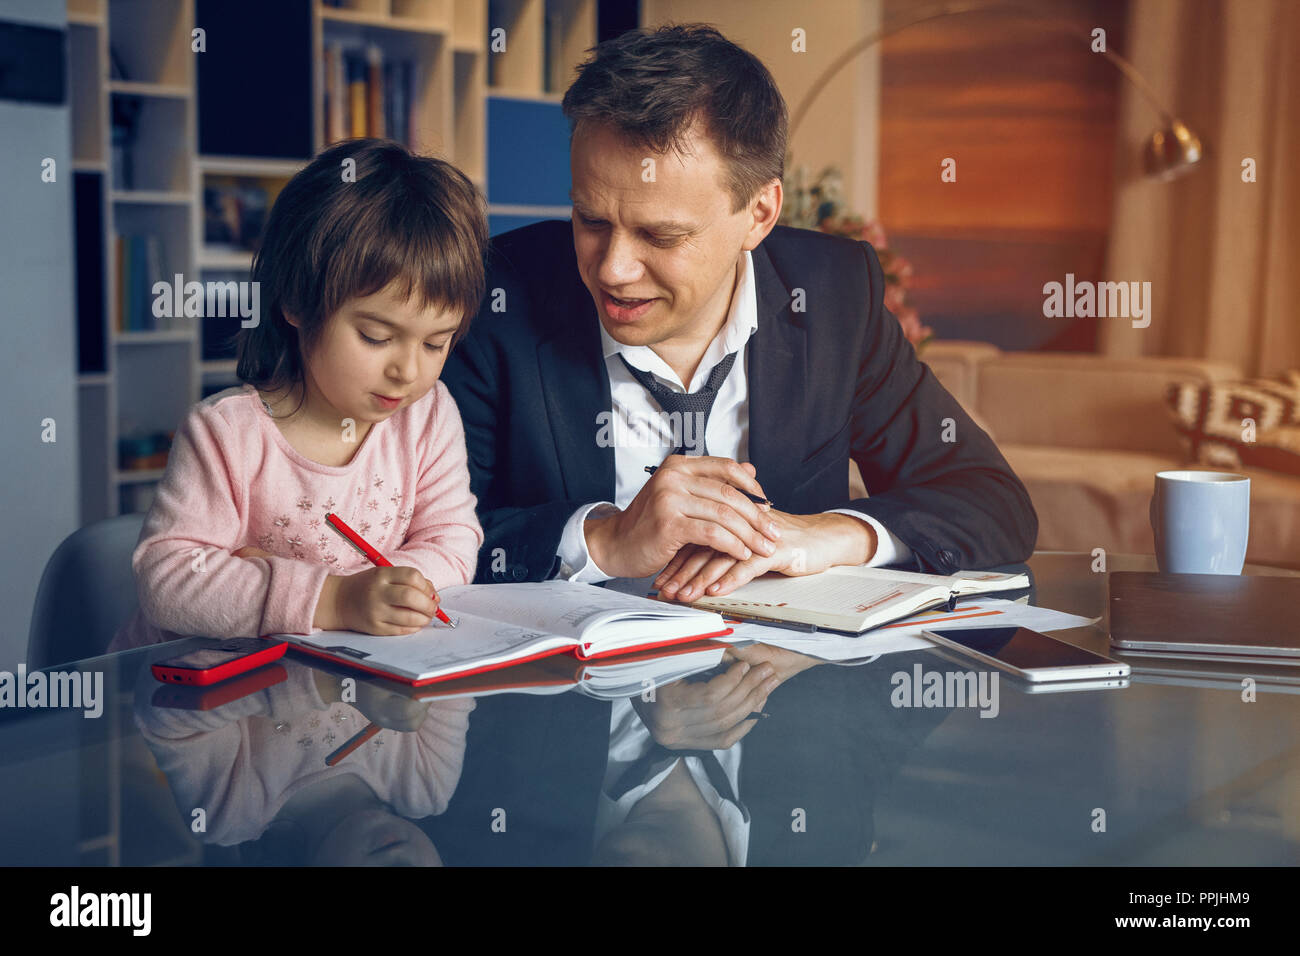 Businessman and his daughter spending time together Stock Photo